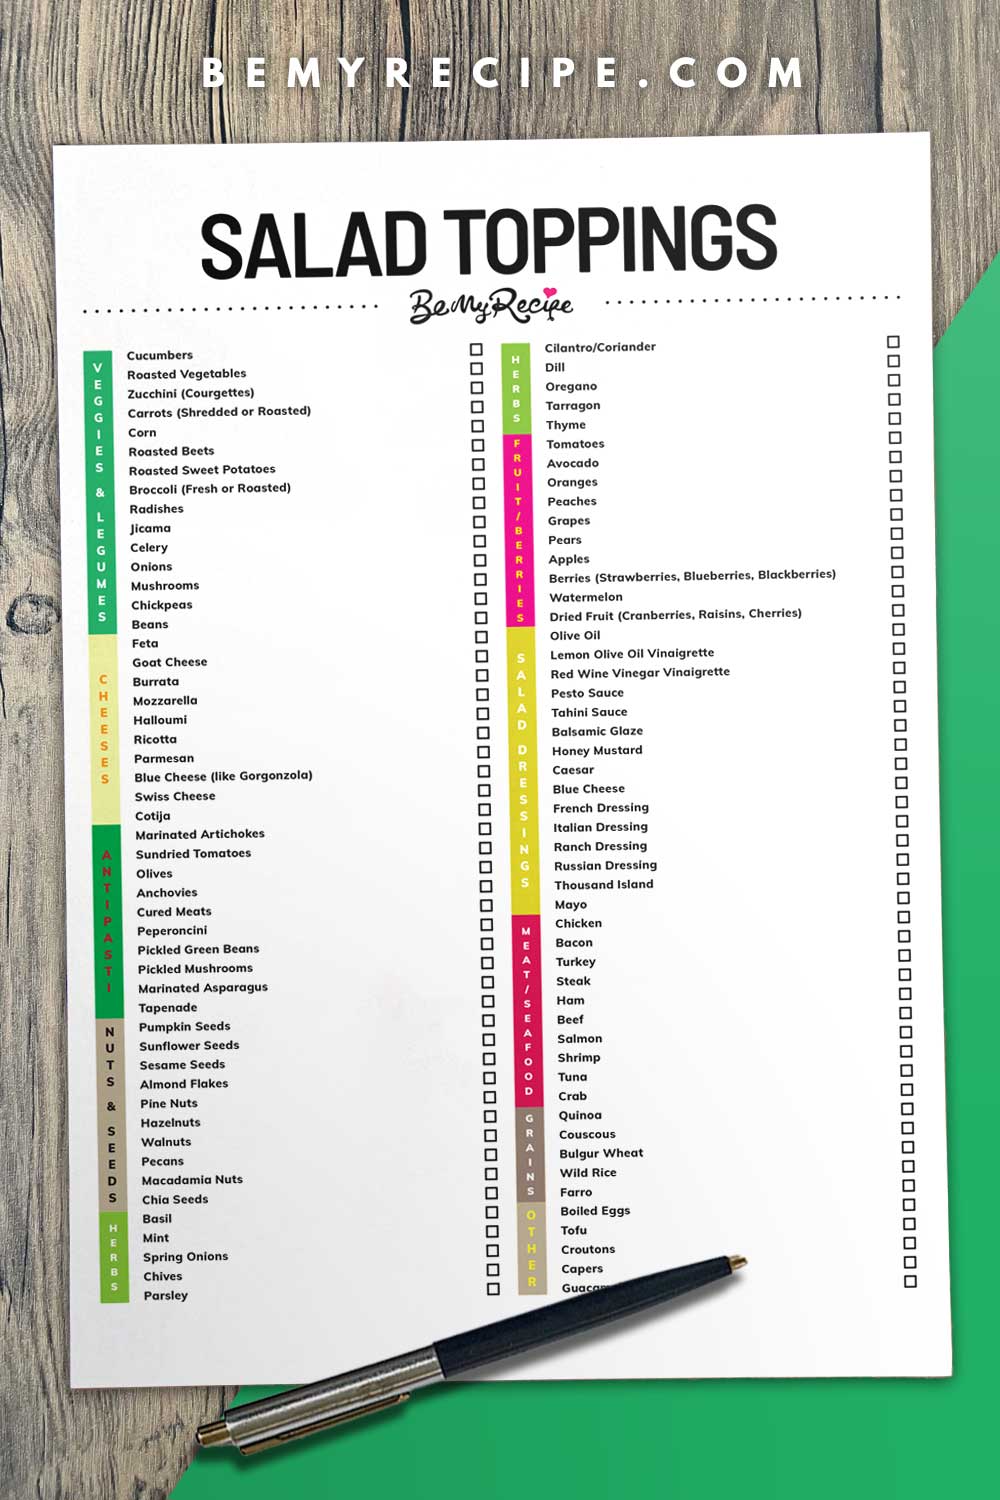 100+ Salad Toppings to Create the Perfect Salad for You